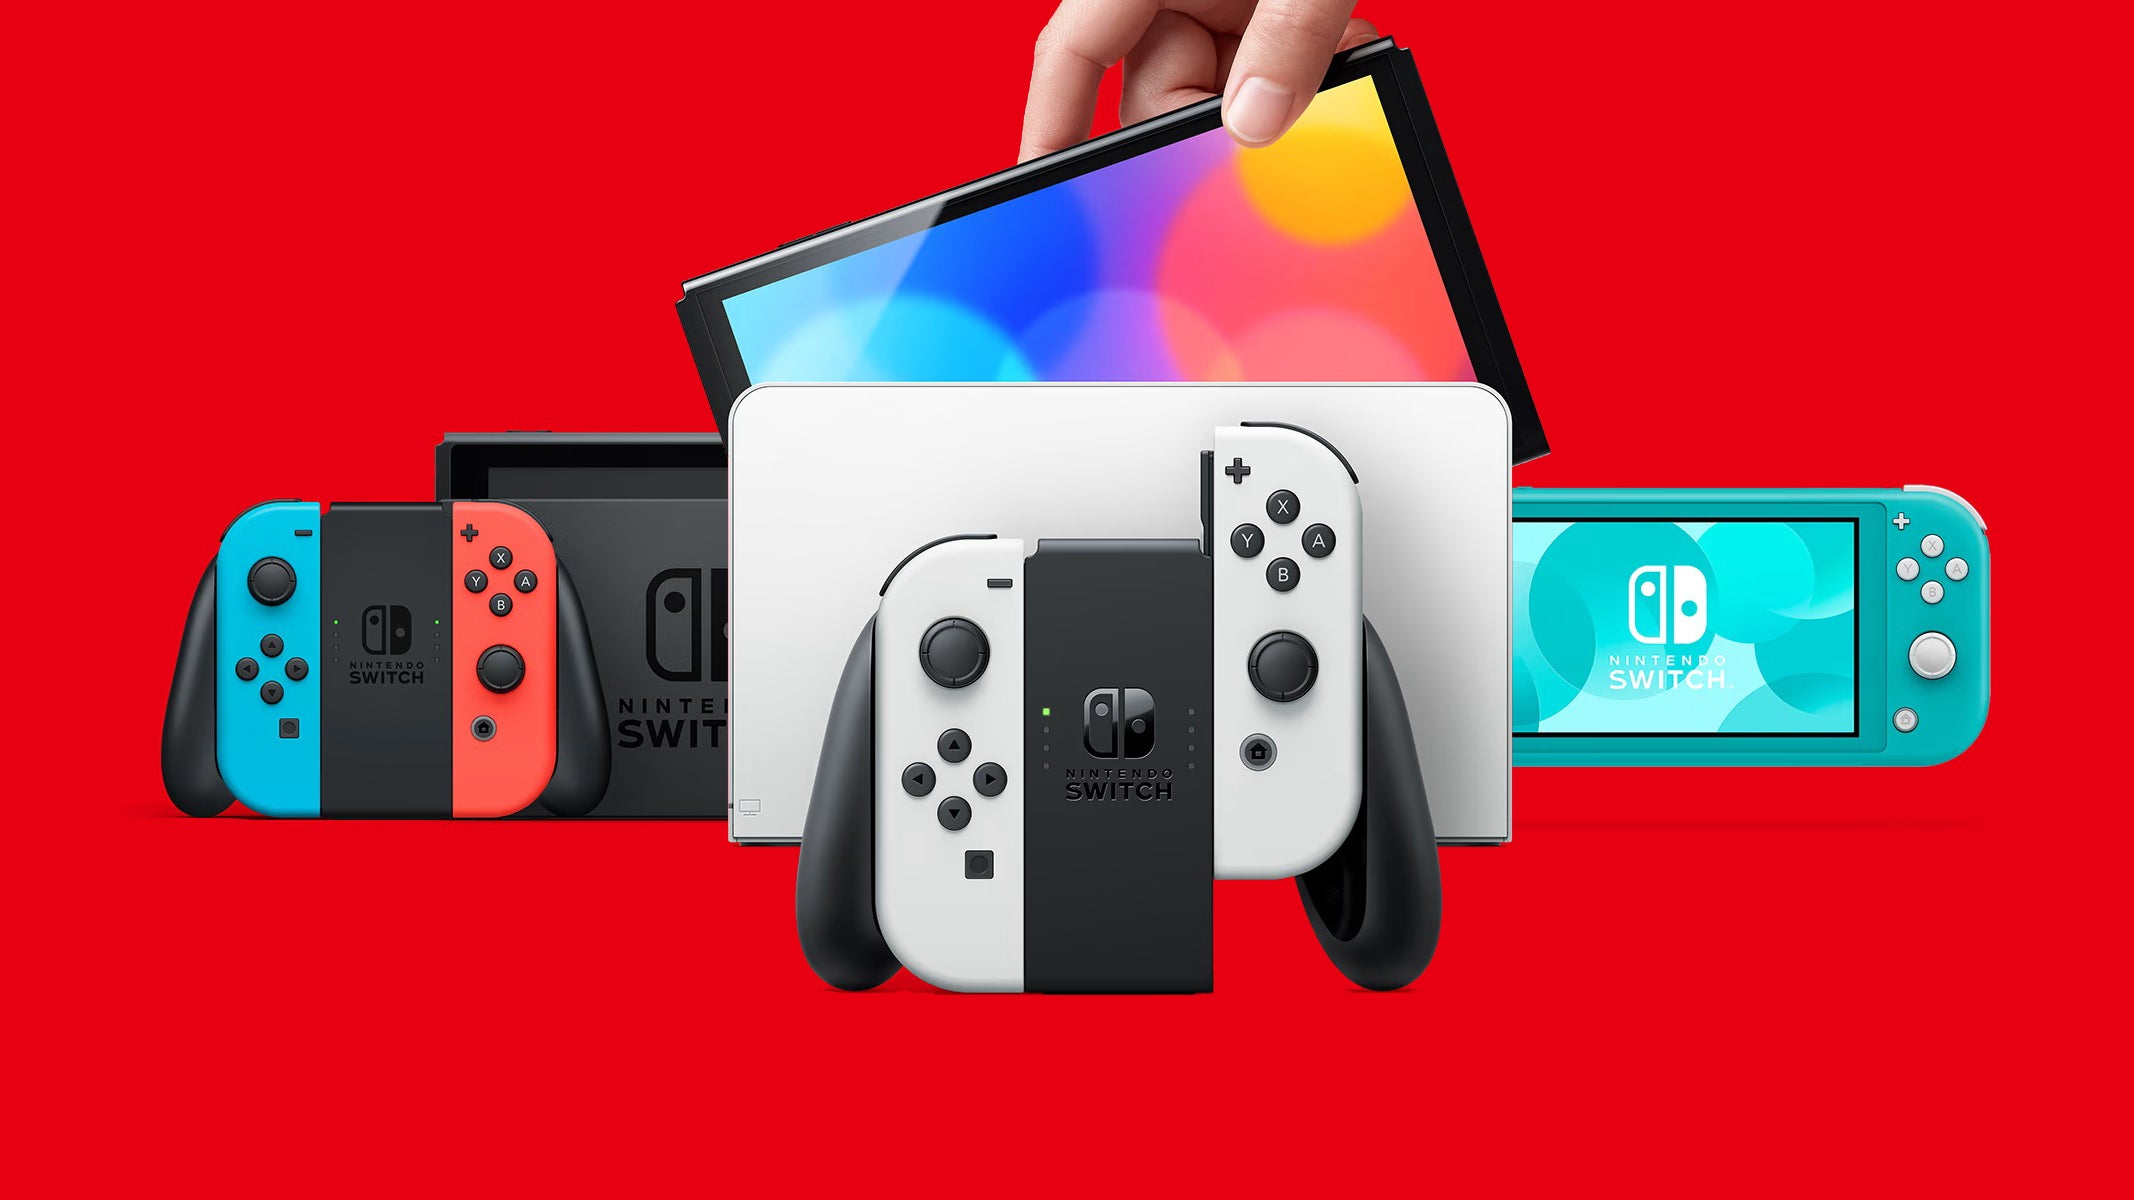 Image for Nintendo Switch becomes best selling console ever in France